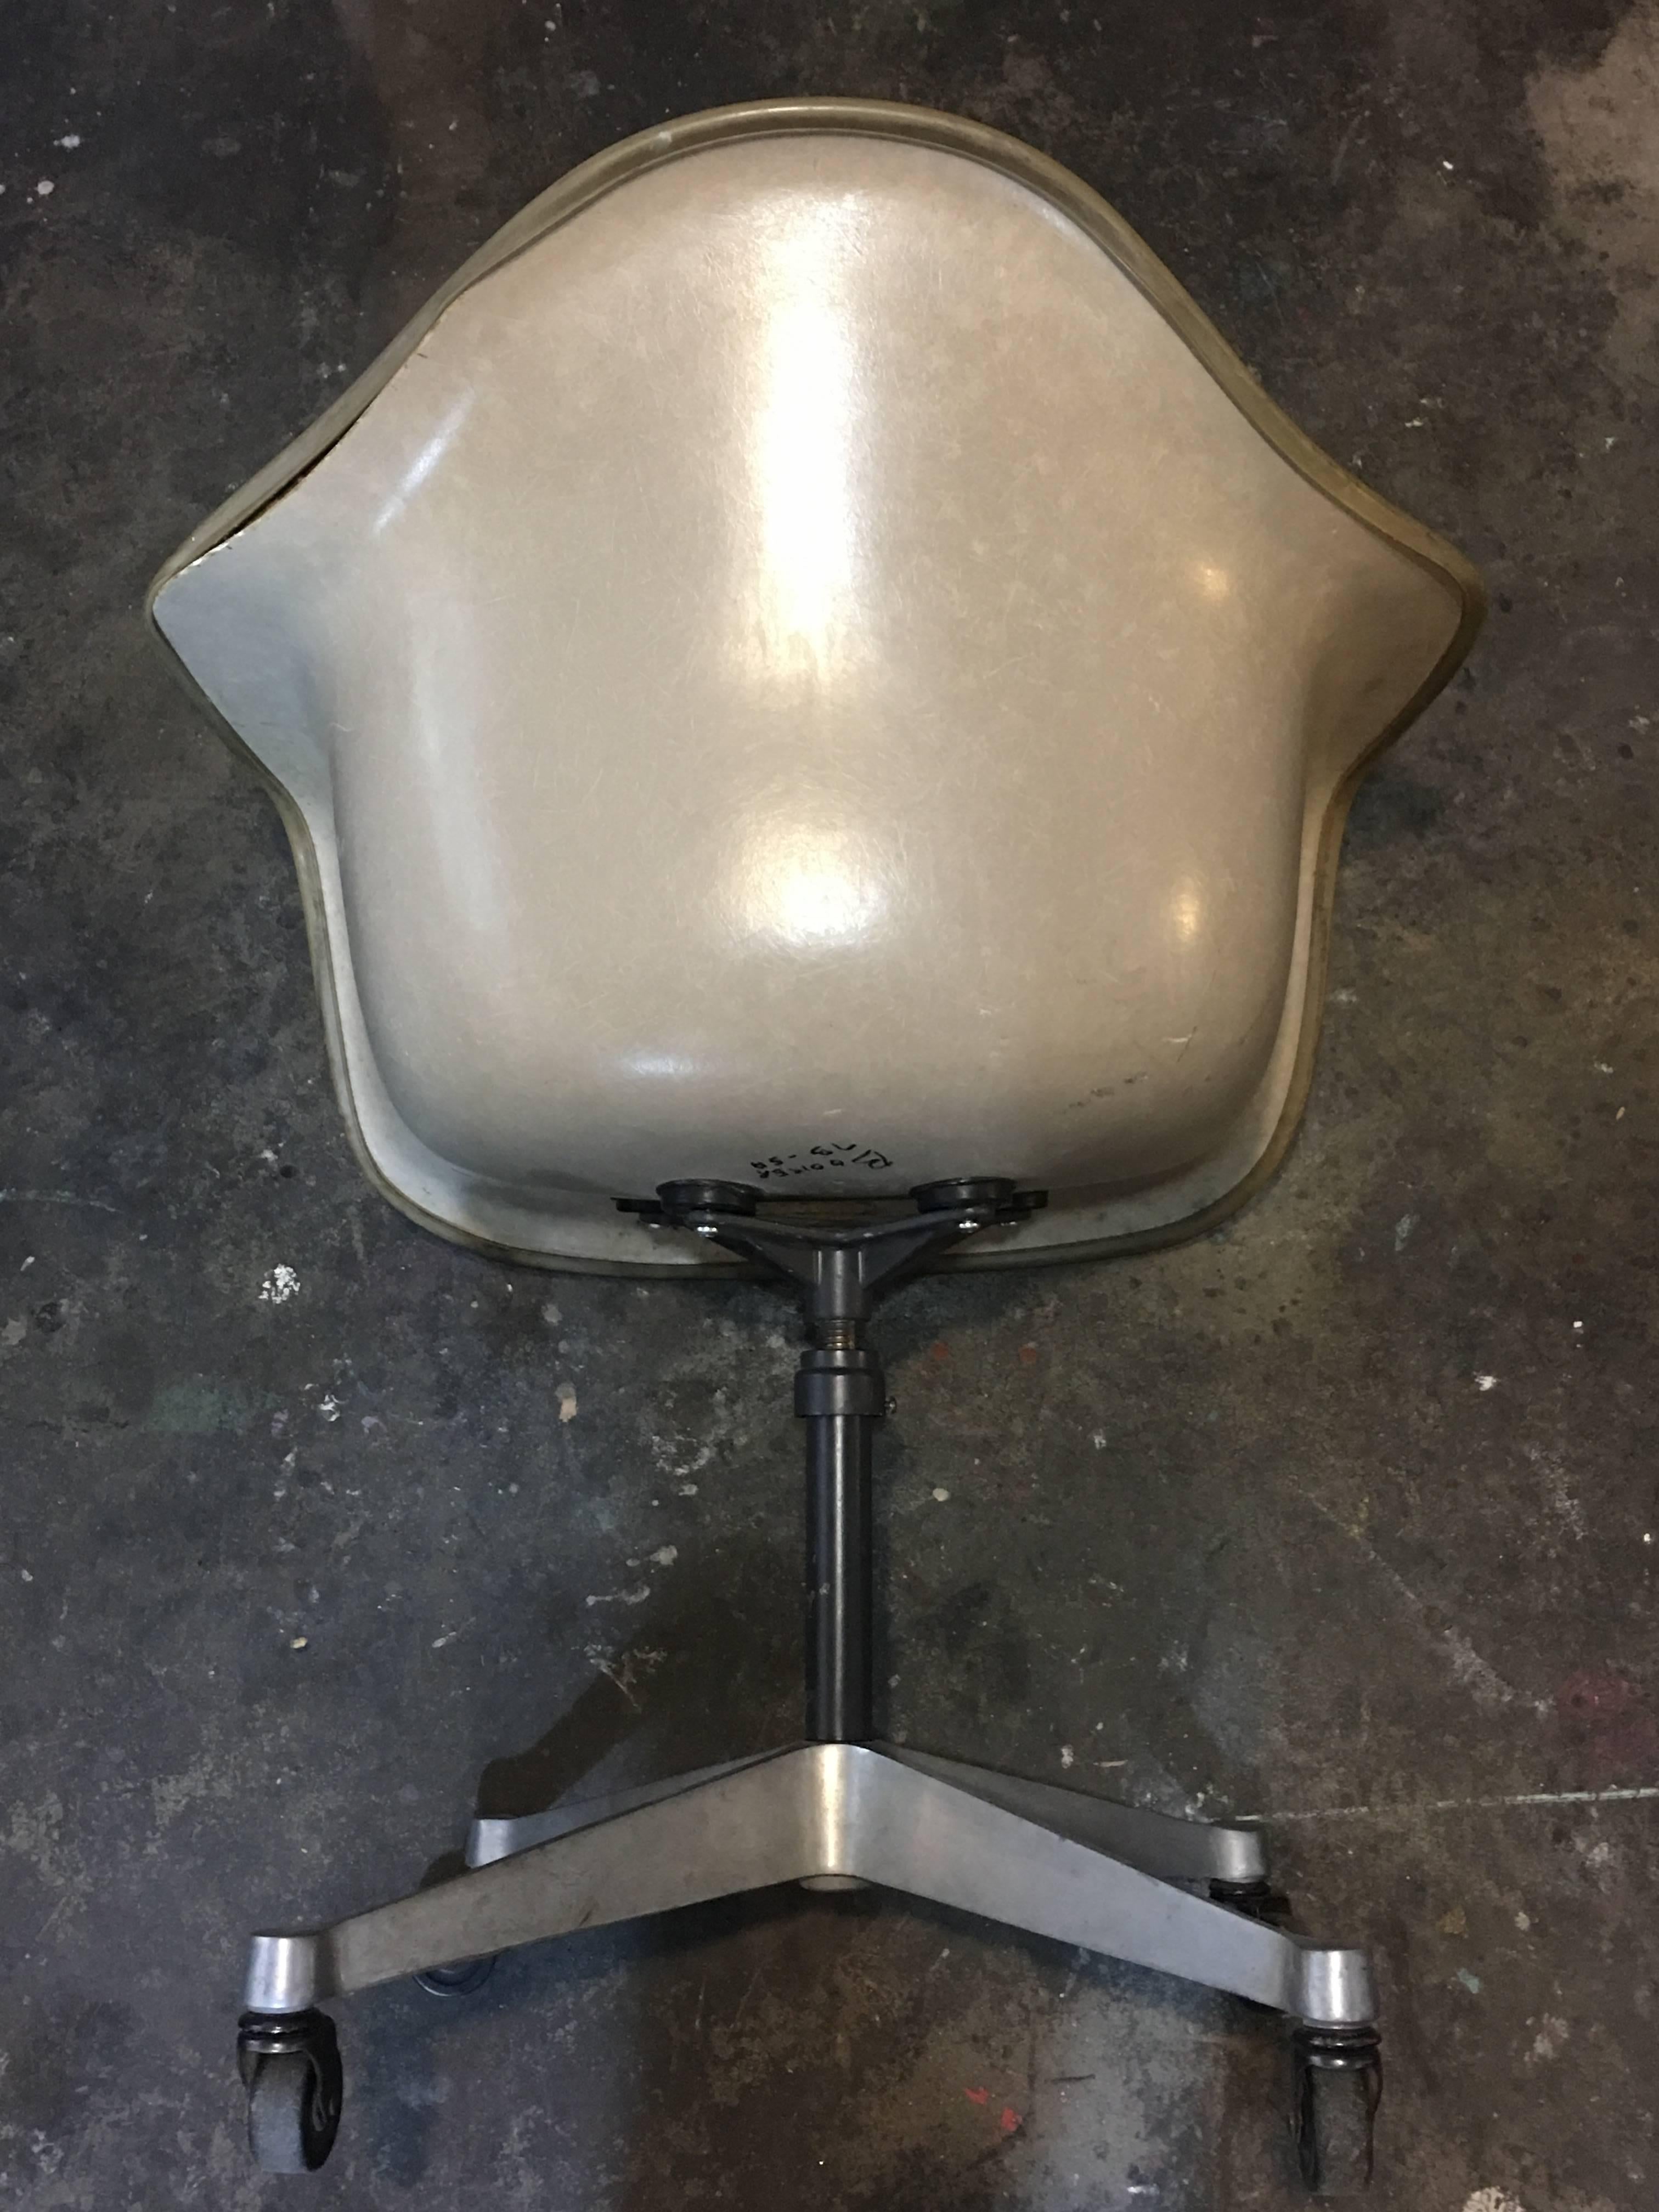 Herman Miller Eames swive armchair. Vinyl upholstery in excellent condition. Base perfect. Swivels and height adjusts. Greige fiberglass with all original shock mounts. Piping coming off the back edge a little bit can be fixed.